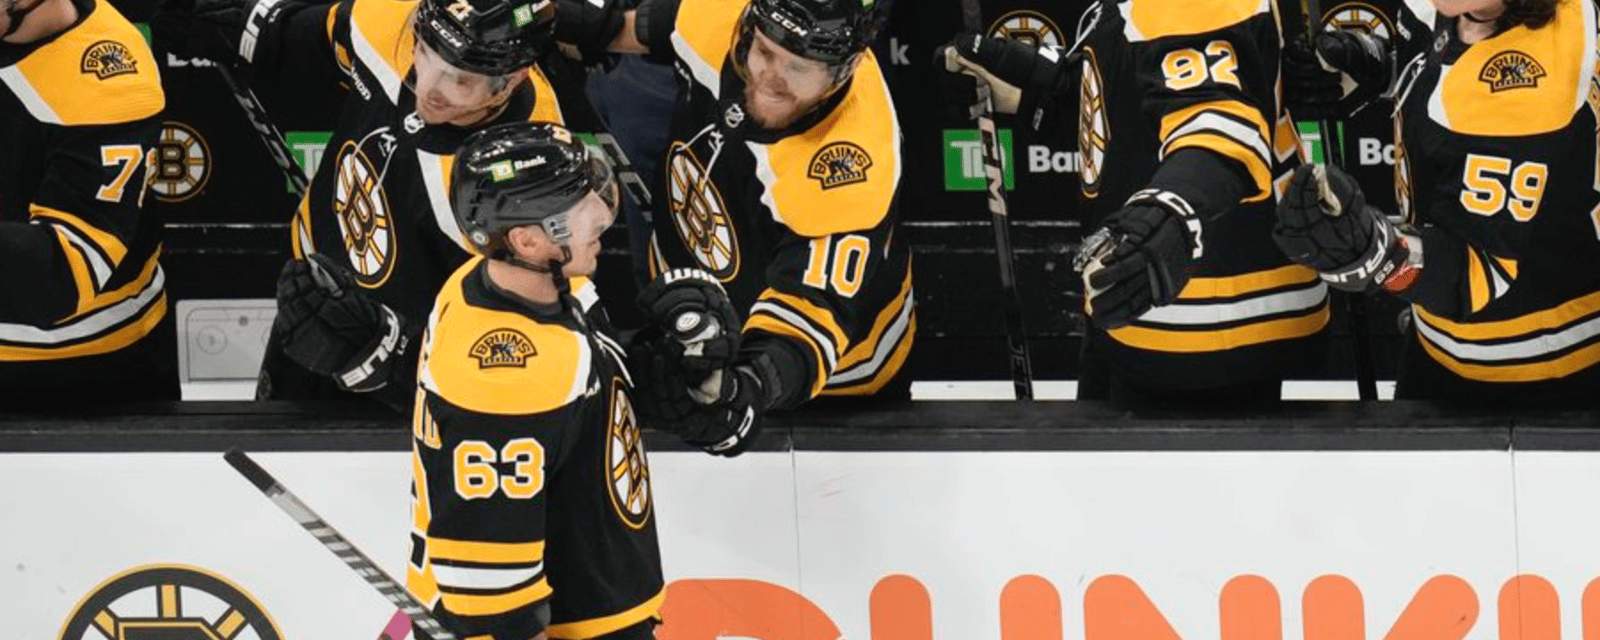 Brad Marchand makes Bruins history in Game 1 win 